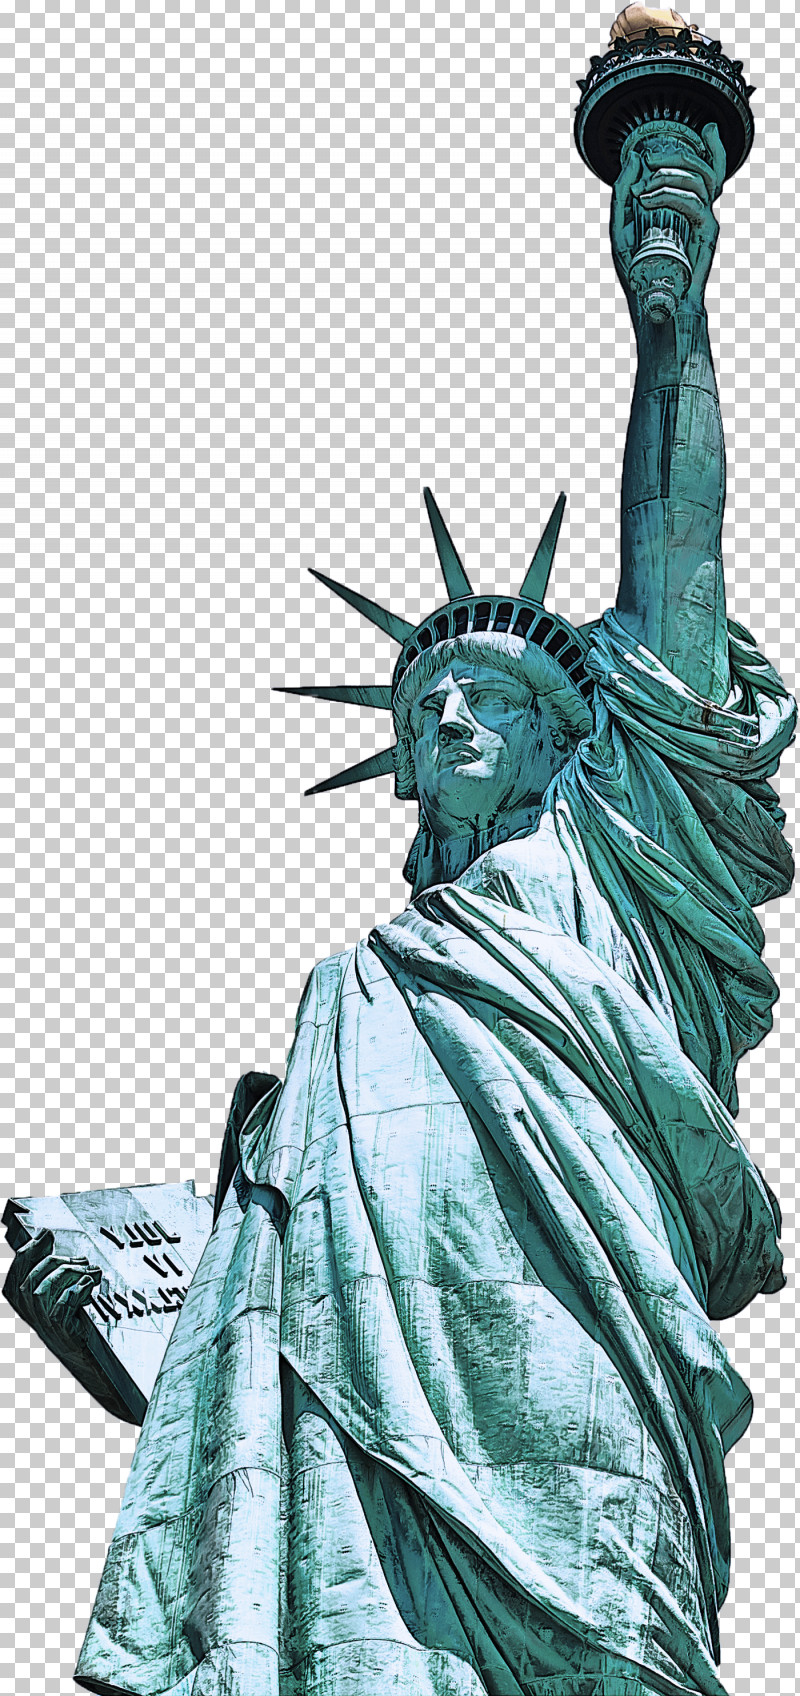 Statue Sculpture Classical Sculpture Stone Carving Statue Of Liberty National Monument PNG, Clipart, Carving, Character, Classical Sculpture, Line Art, Painting Free PNG Download